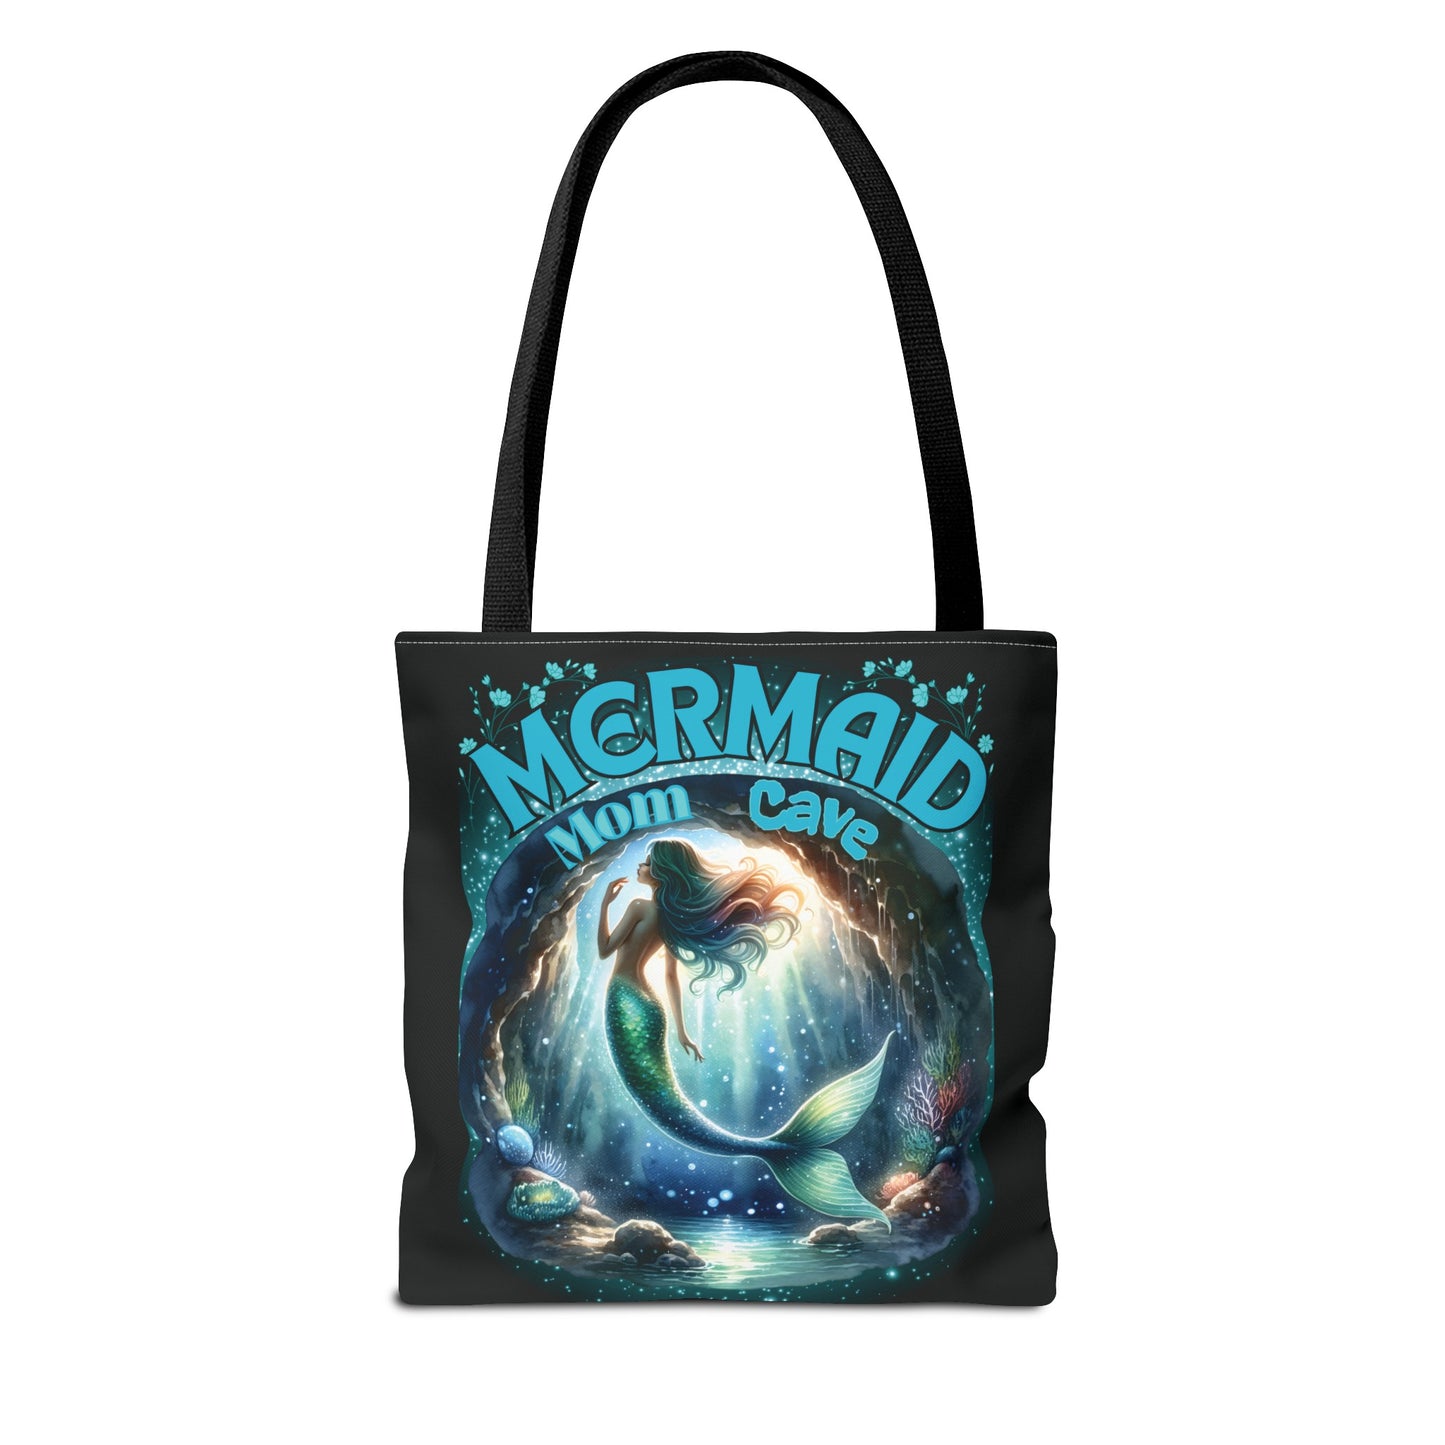 A gorgeous mermaid swims in her mermaid mom cave with her sea shells and plants around her - Mermaid Mom Cave is the text above her cave with blue flowers above the text - black bag - inside too- handles